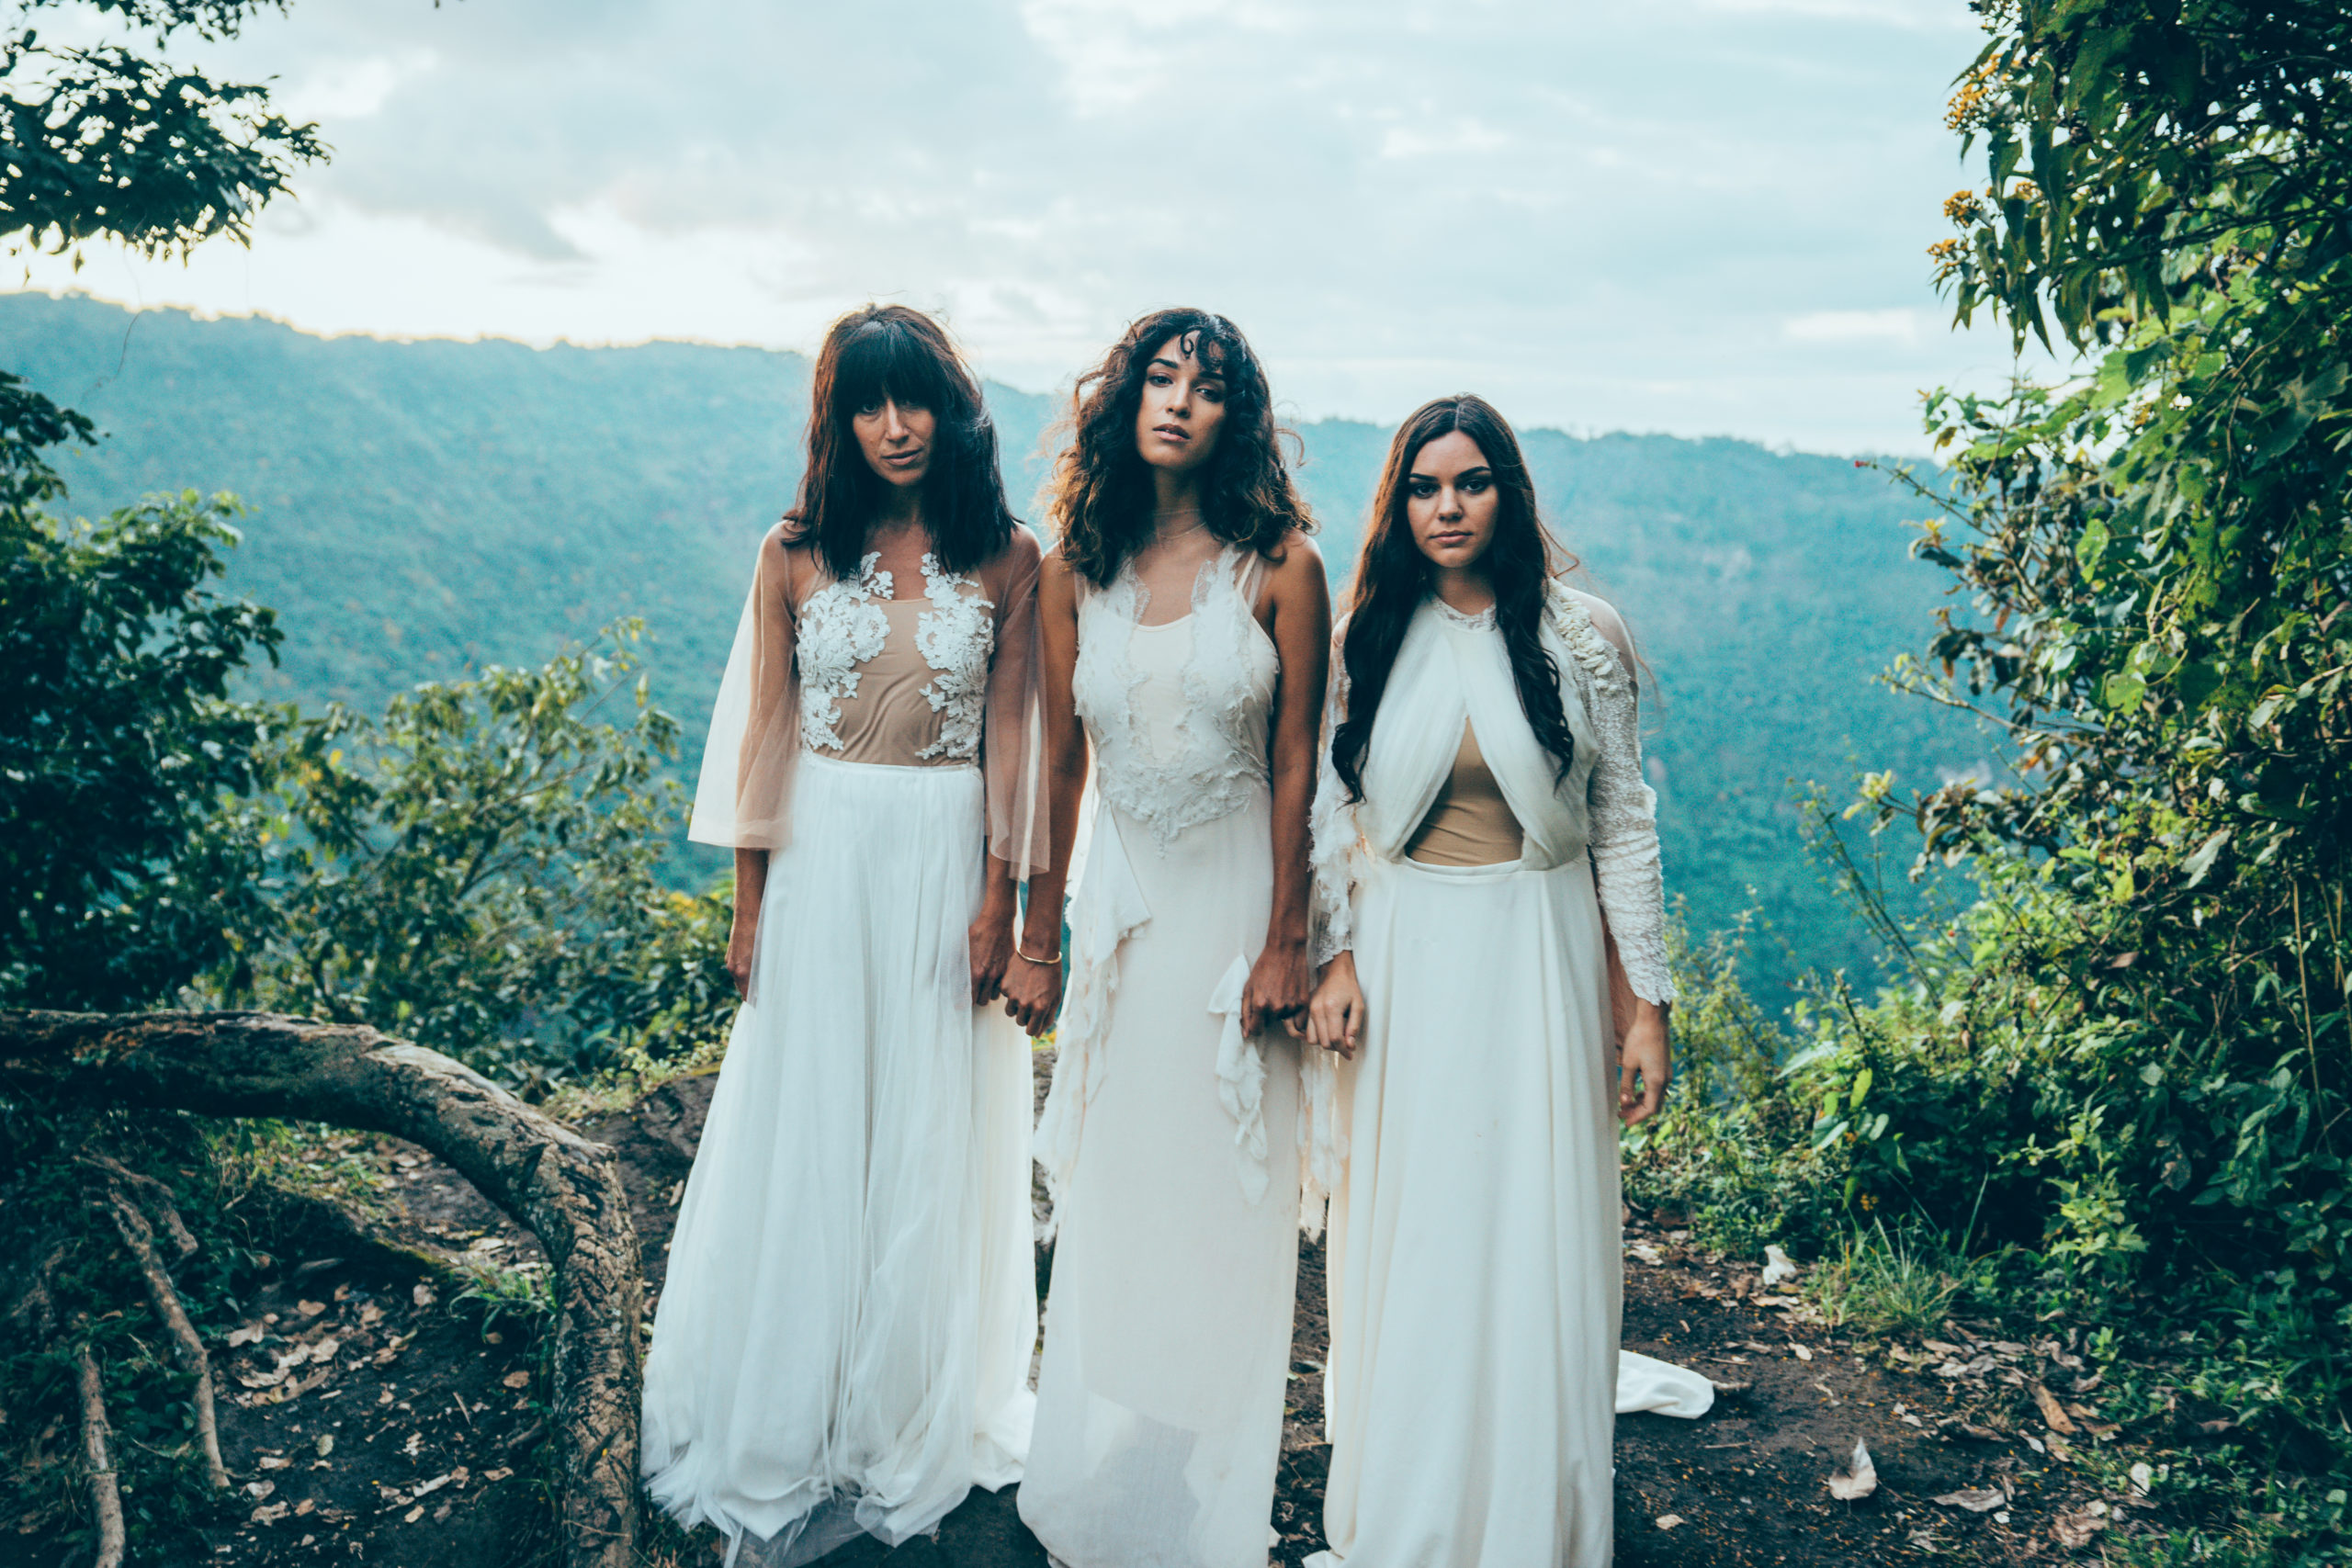 Three women in white dresses holding hands on the side of a mountain